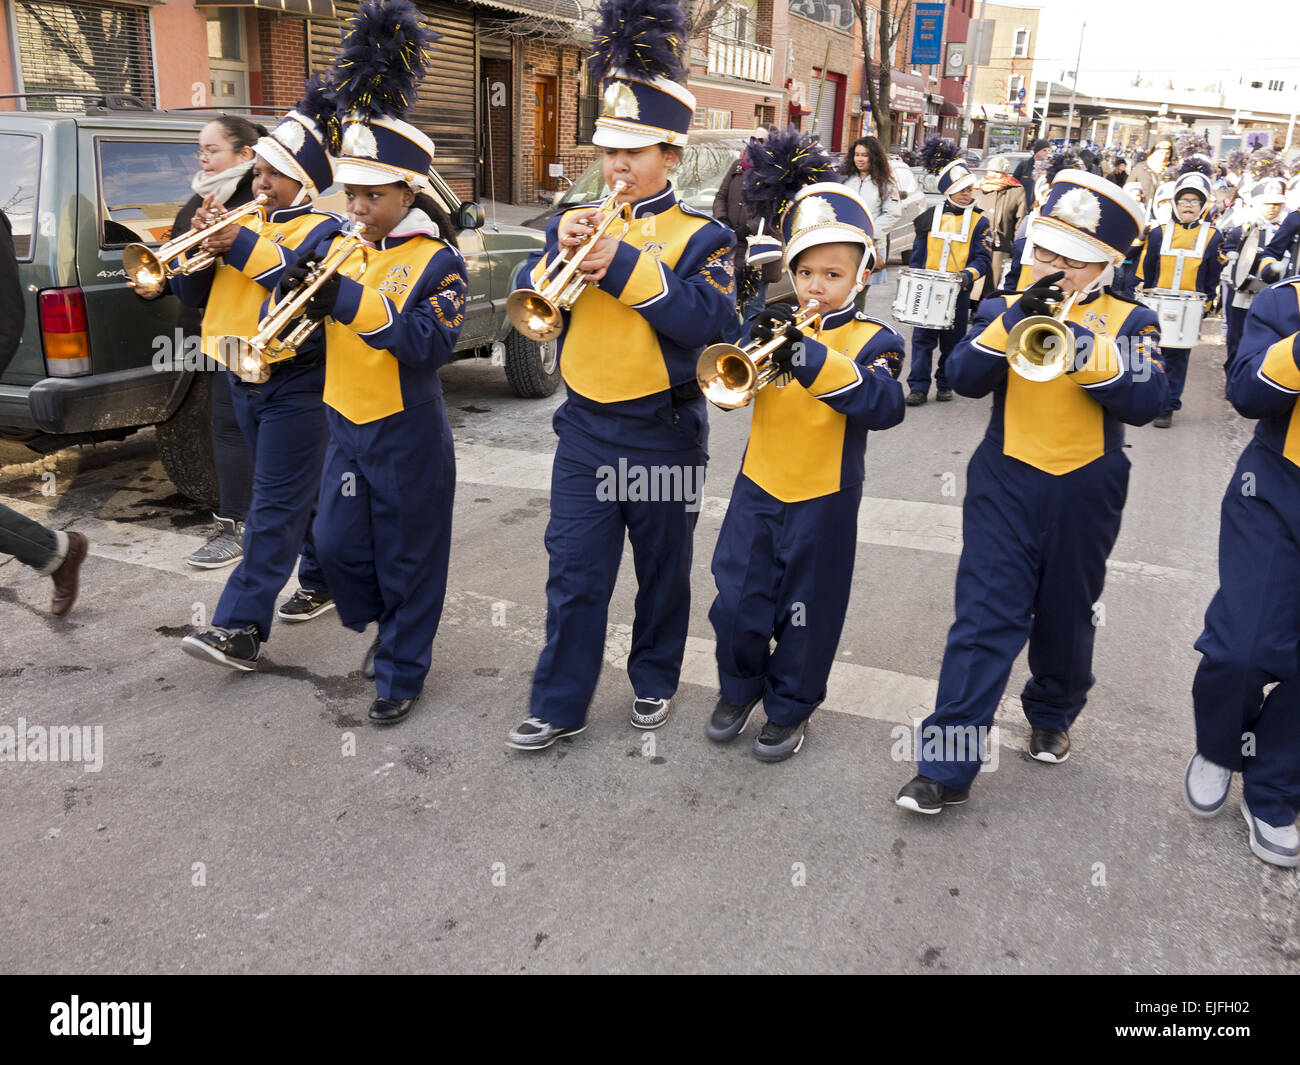 Elementary school marching band in the Three Kings Day Parade in Williamsburg, Brooklyn, NY. Stock Photo